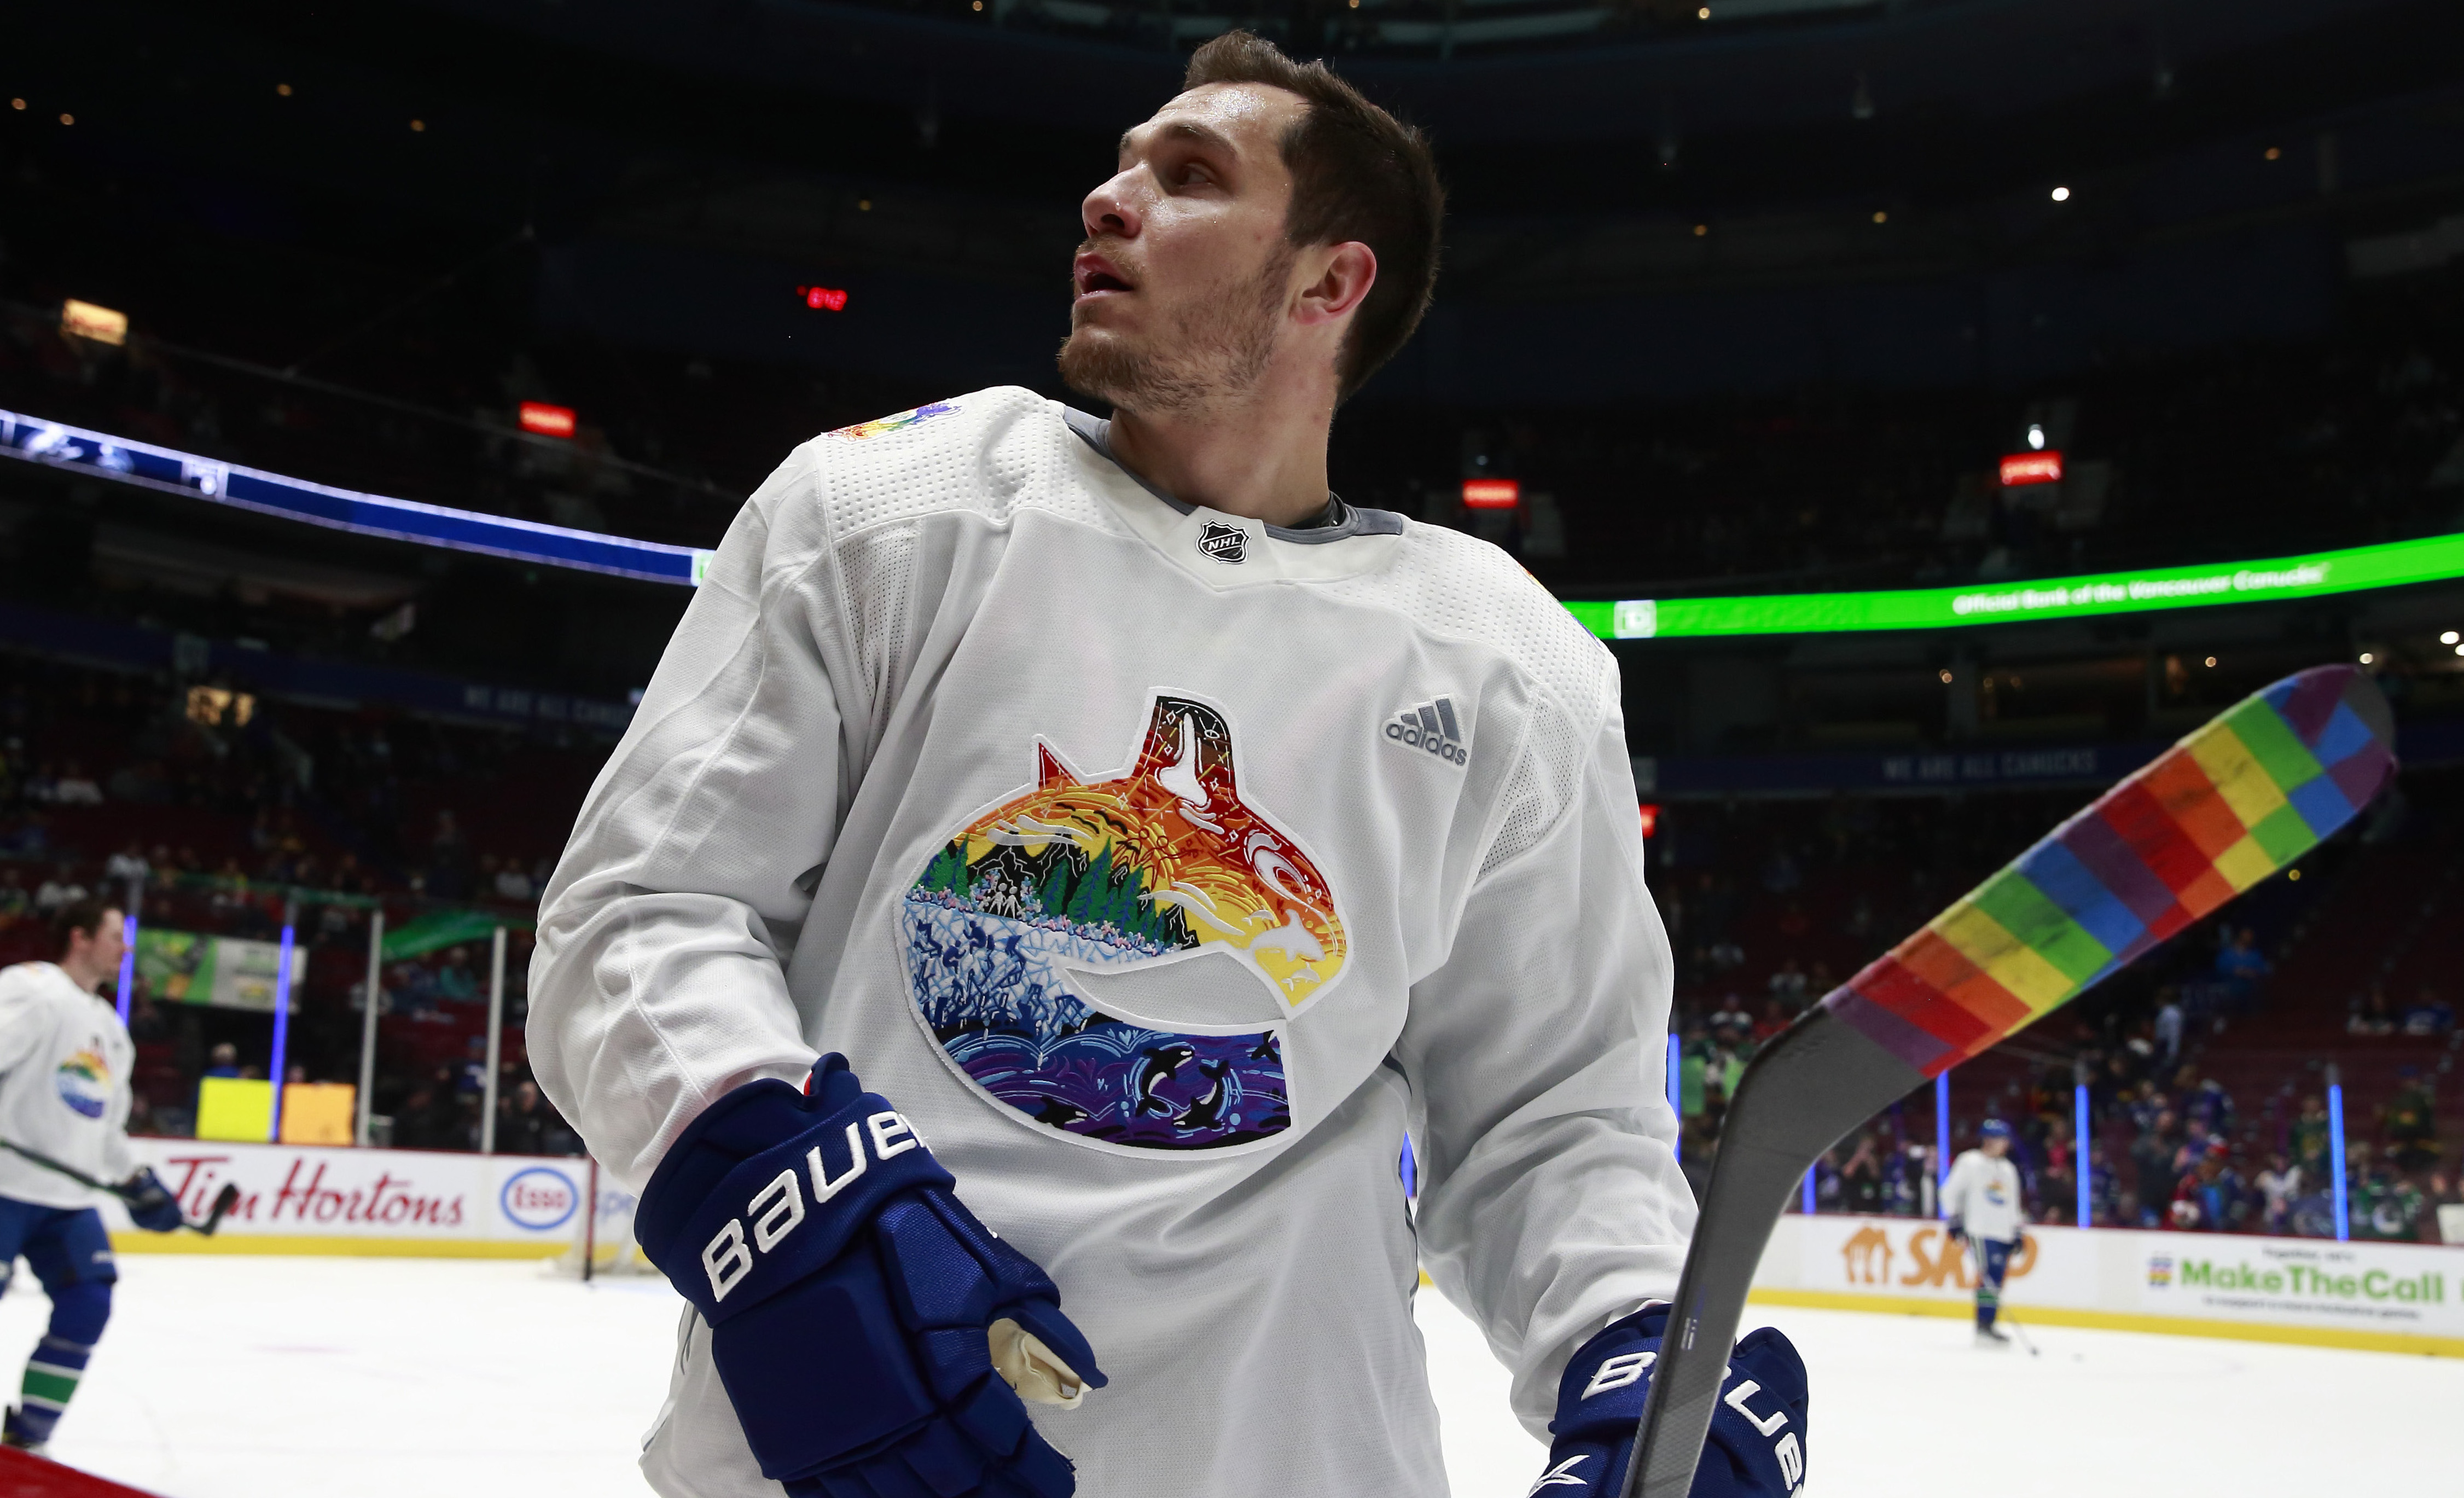 NHL says specialty jerseys, like for Pride Night, will no longer